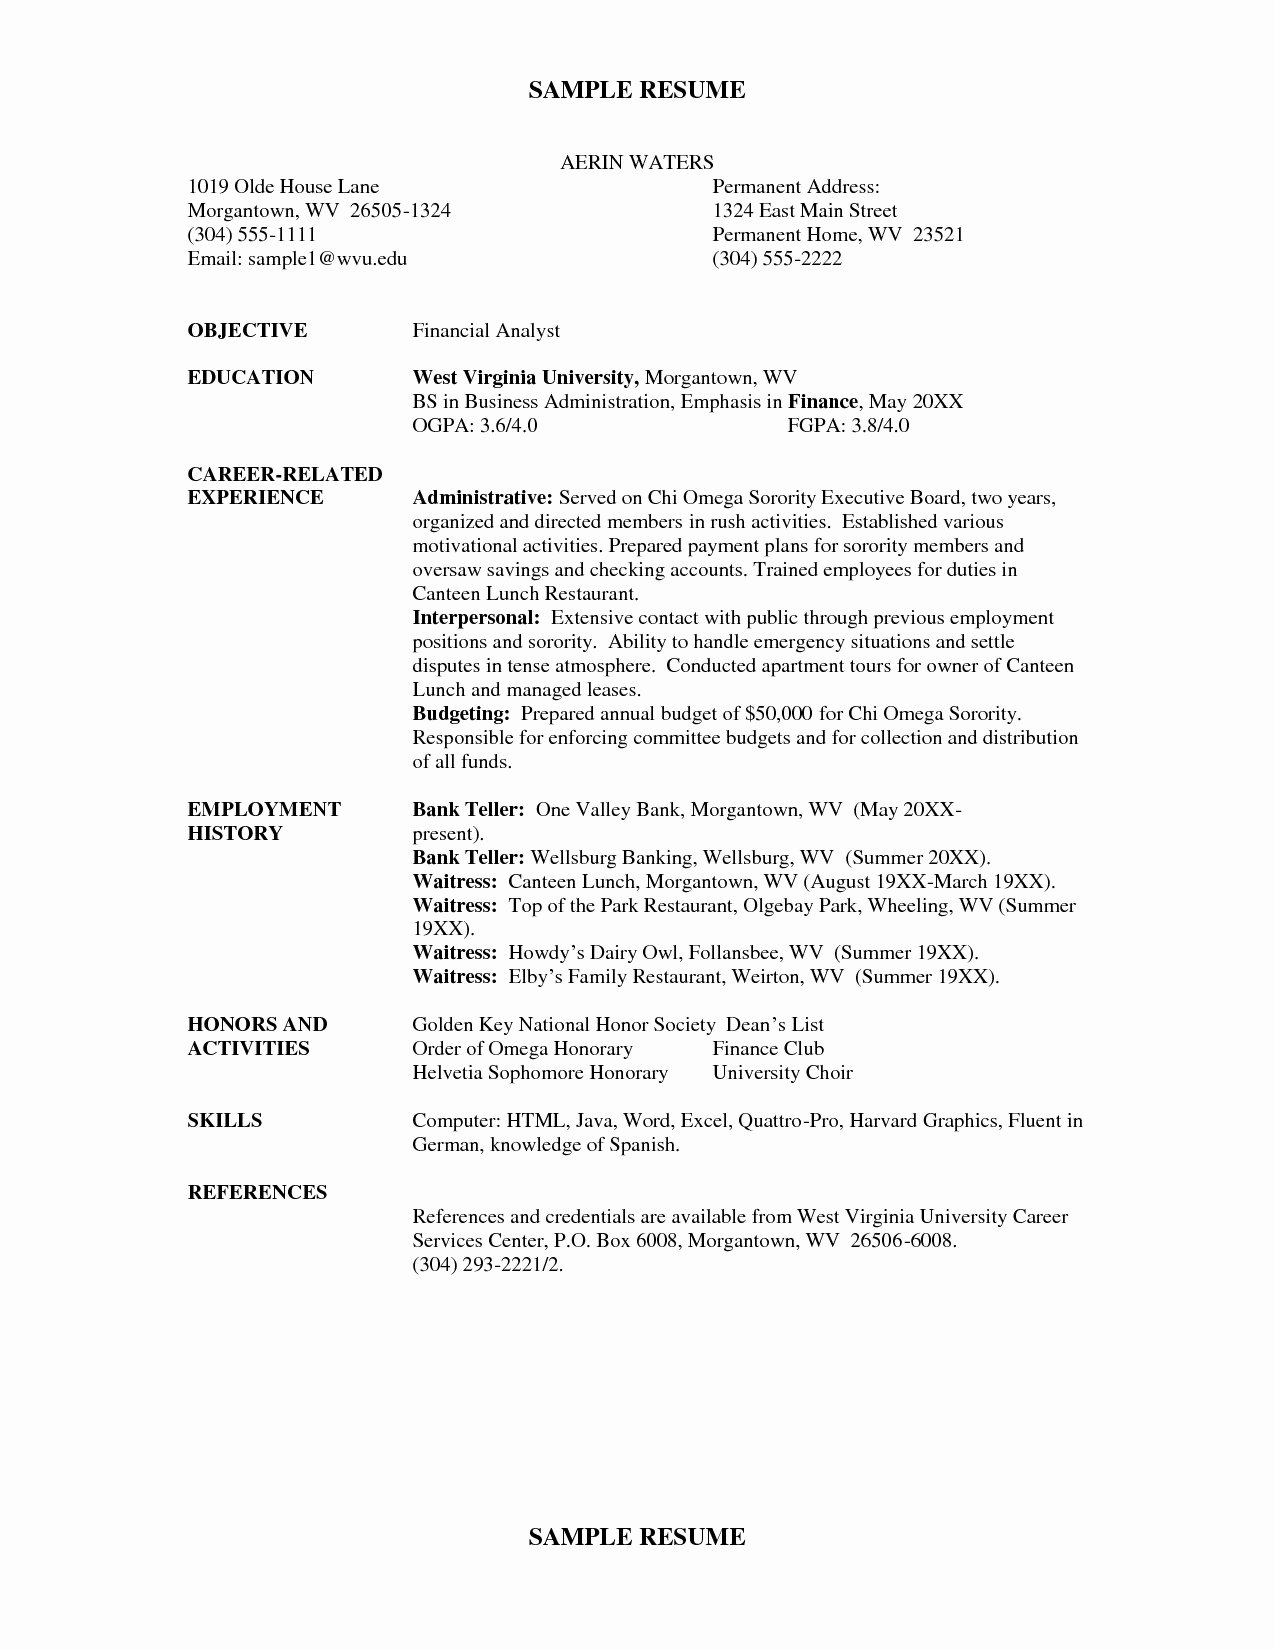 Sorority Letter Of Support Lovely Stephalicio Sample Resume Collections